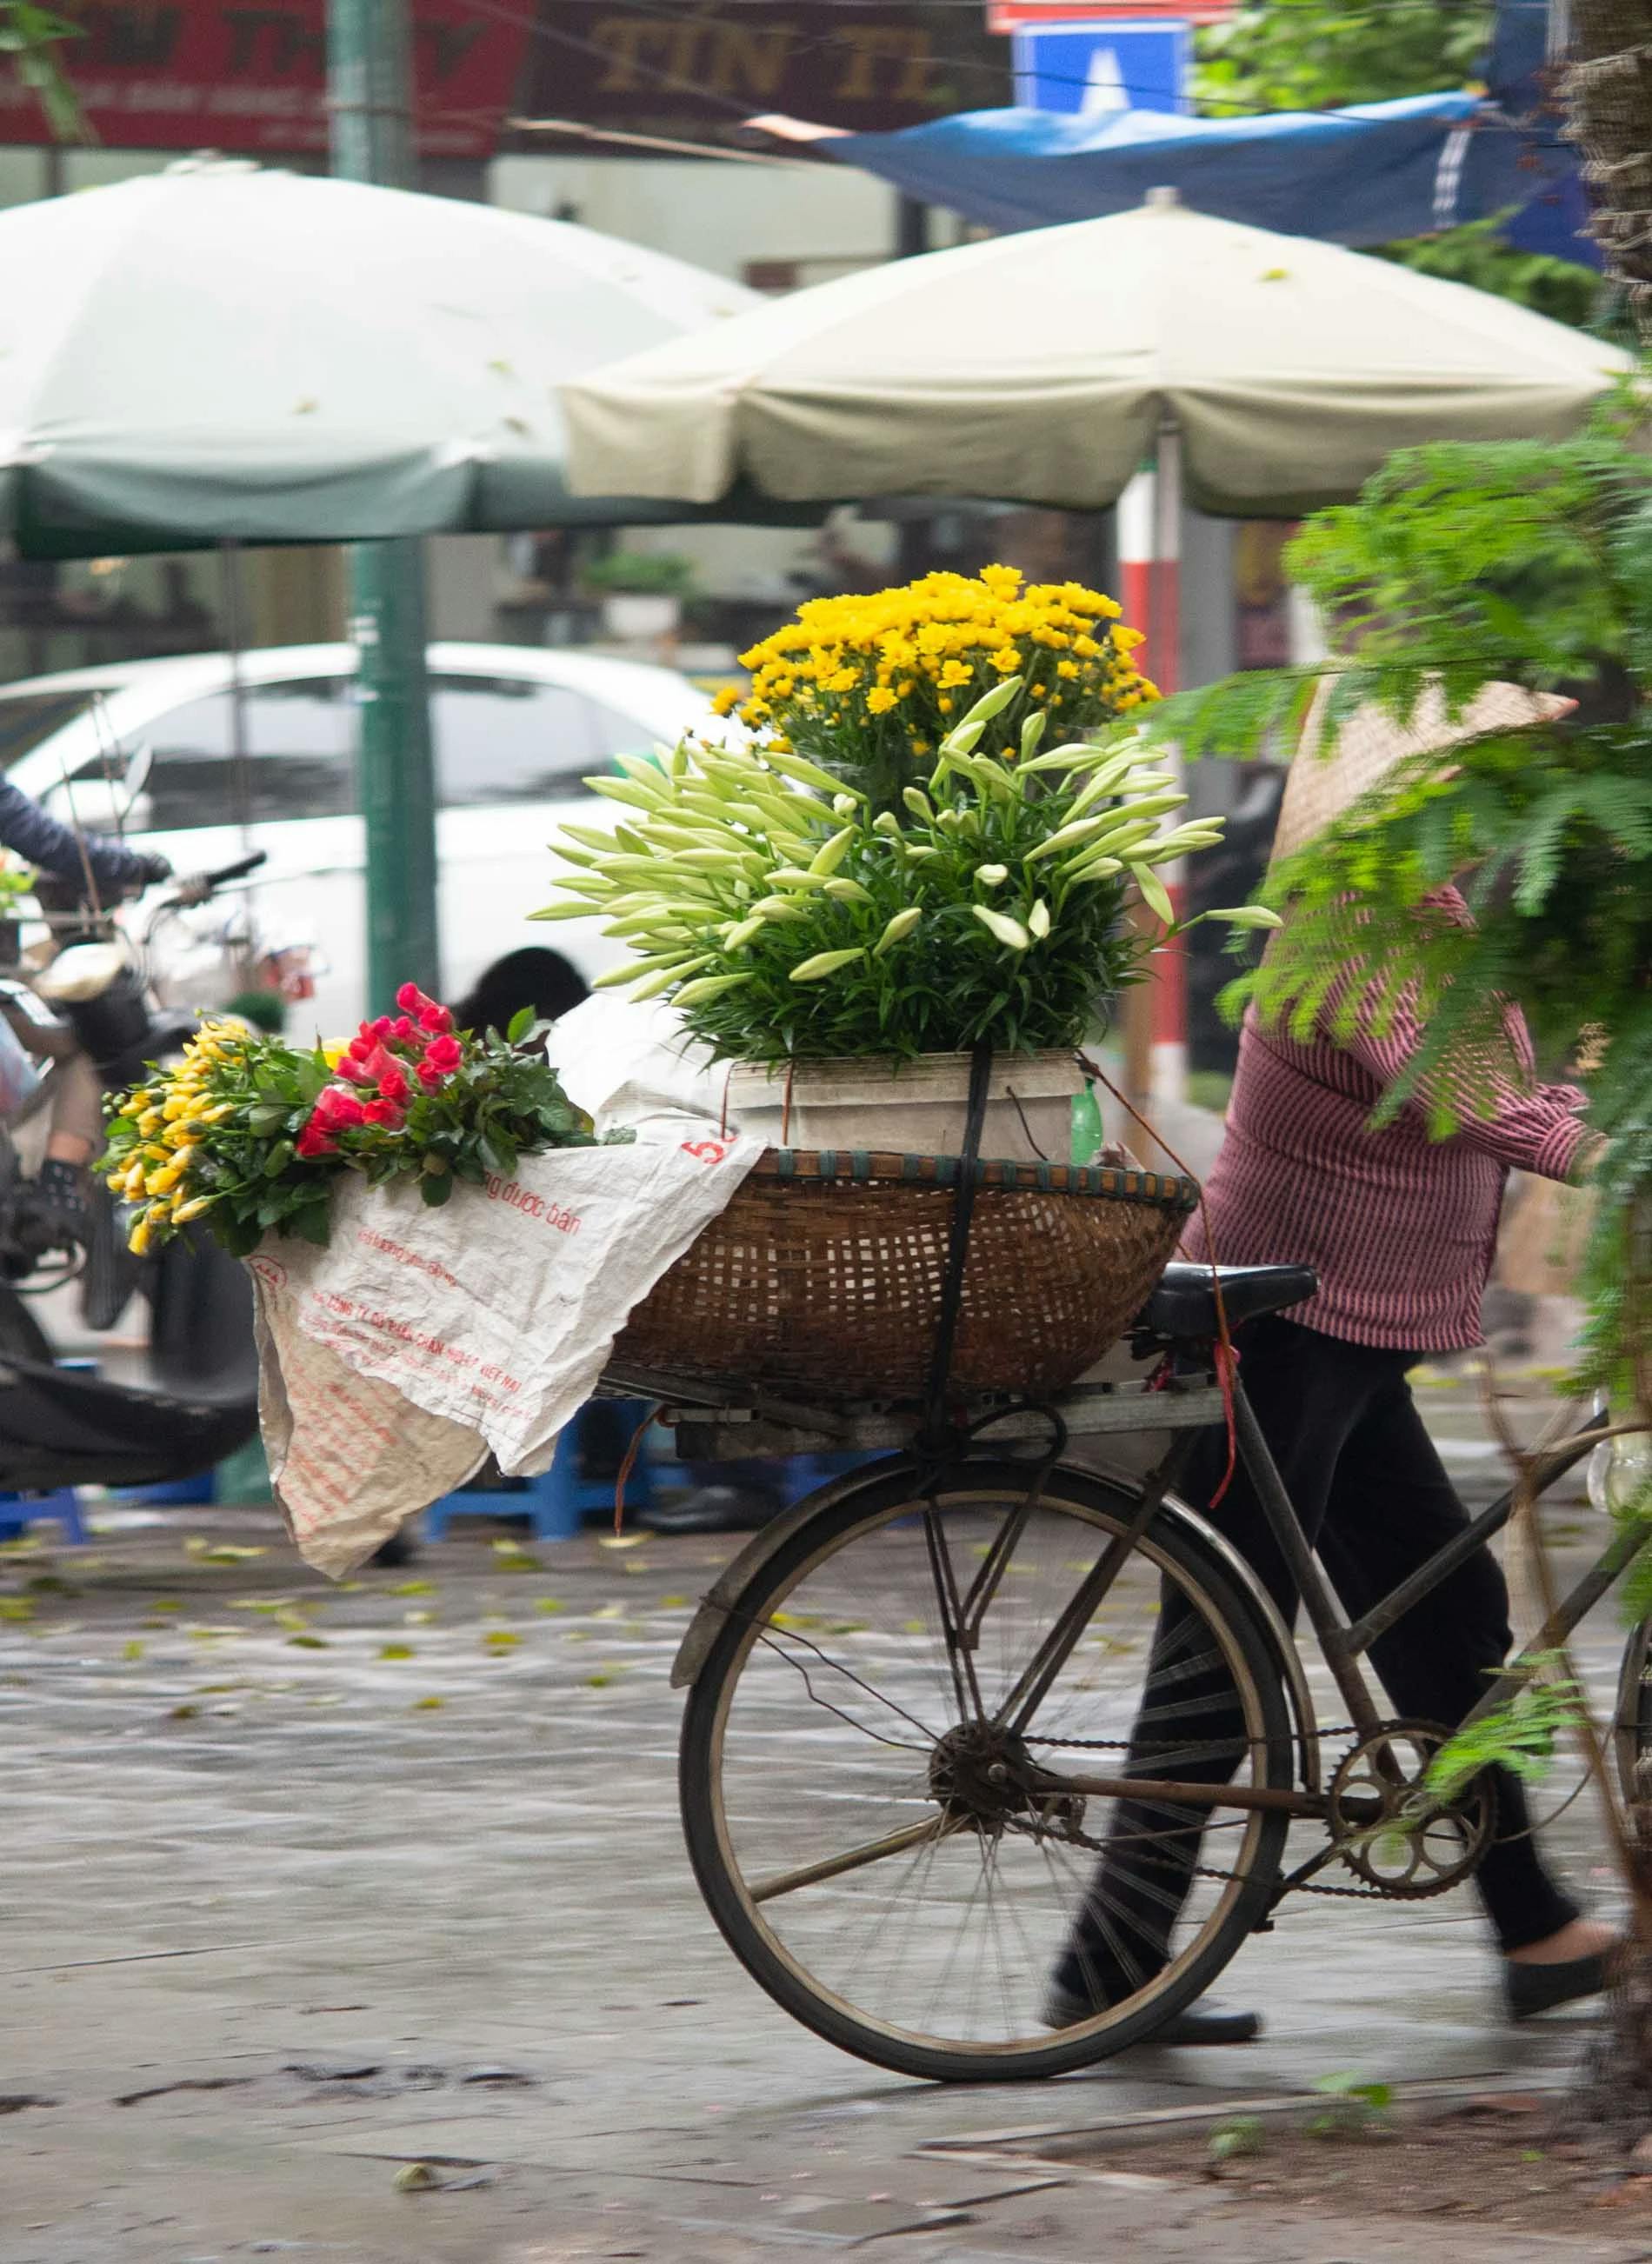 a woman in Hanoi (Vietnam) pushing a bike, with a lot of flowers. You can not see the face of the woman, as it's covered by some green plants. It is possible though to notice that she is wearing a traditional hat